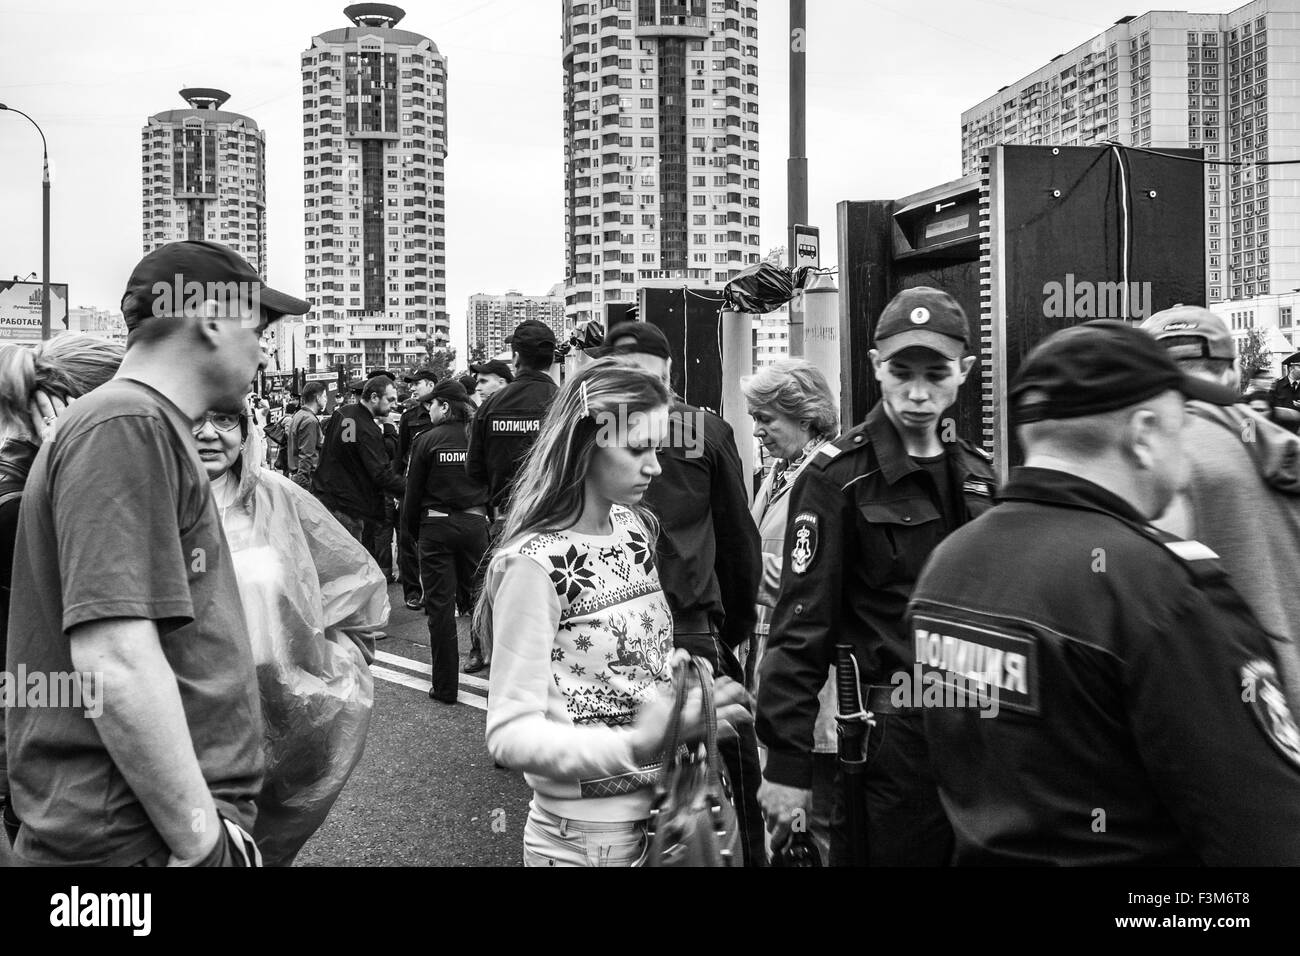 Moscow, Russia - September 20, 2015: Meeting of protesting citizens in Moskovsky district of Maryino against dishonest elections Stock Photo